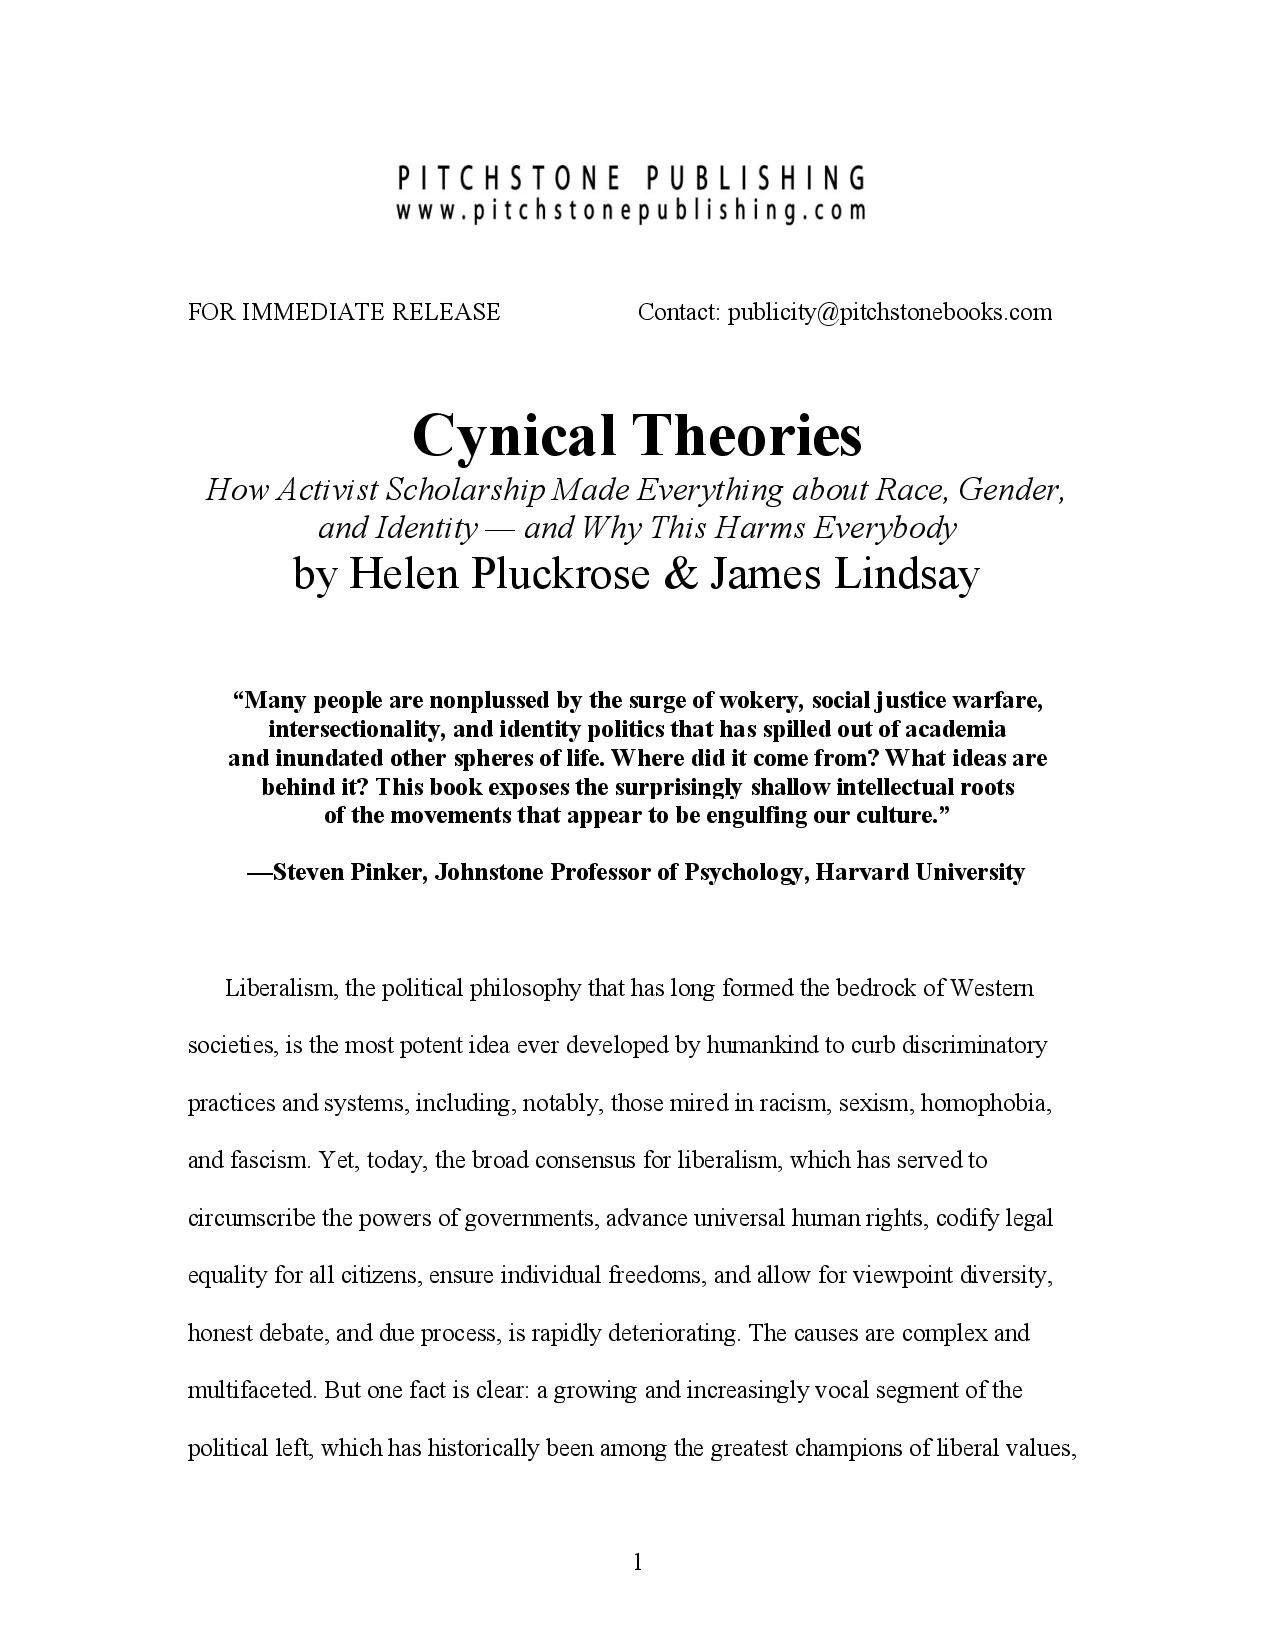 Pitchstone_Cynical Theories_press release_001.jpg